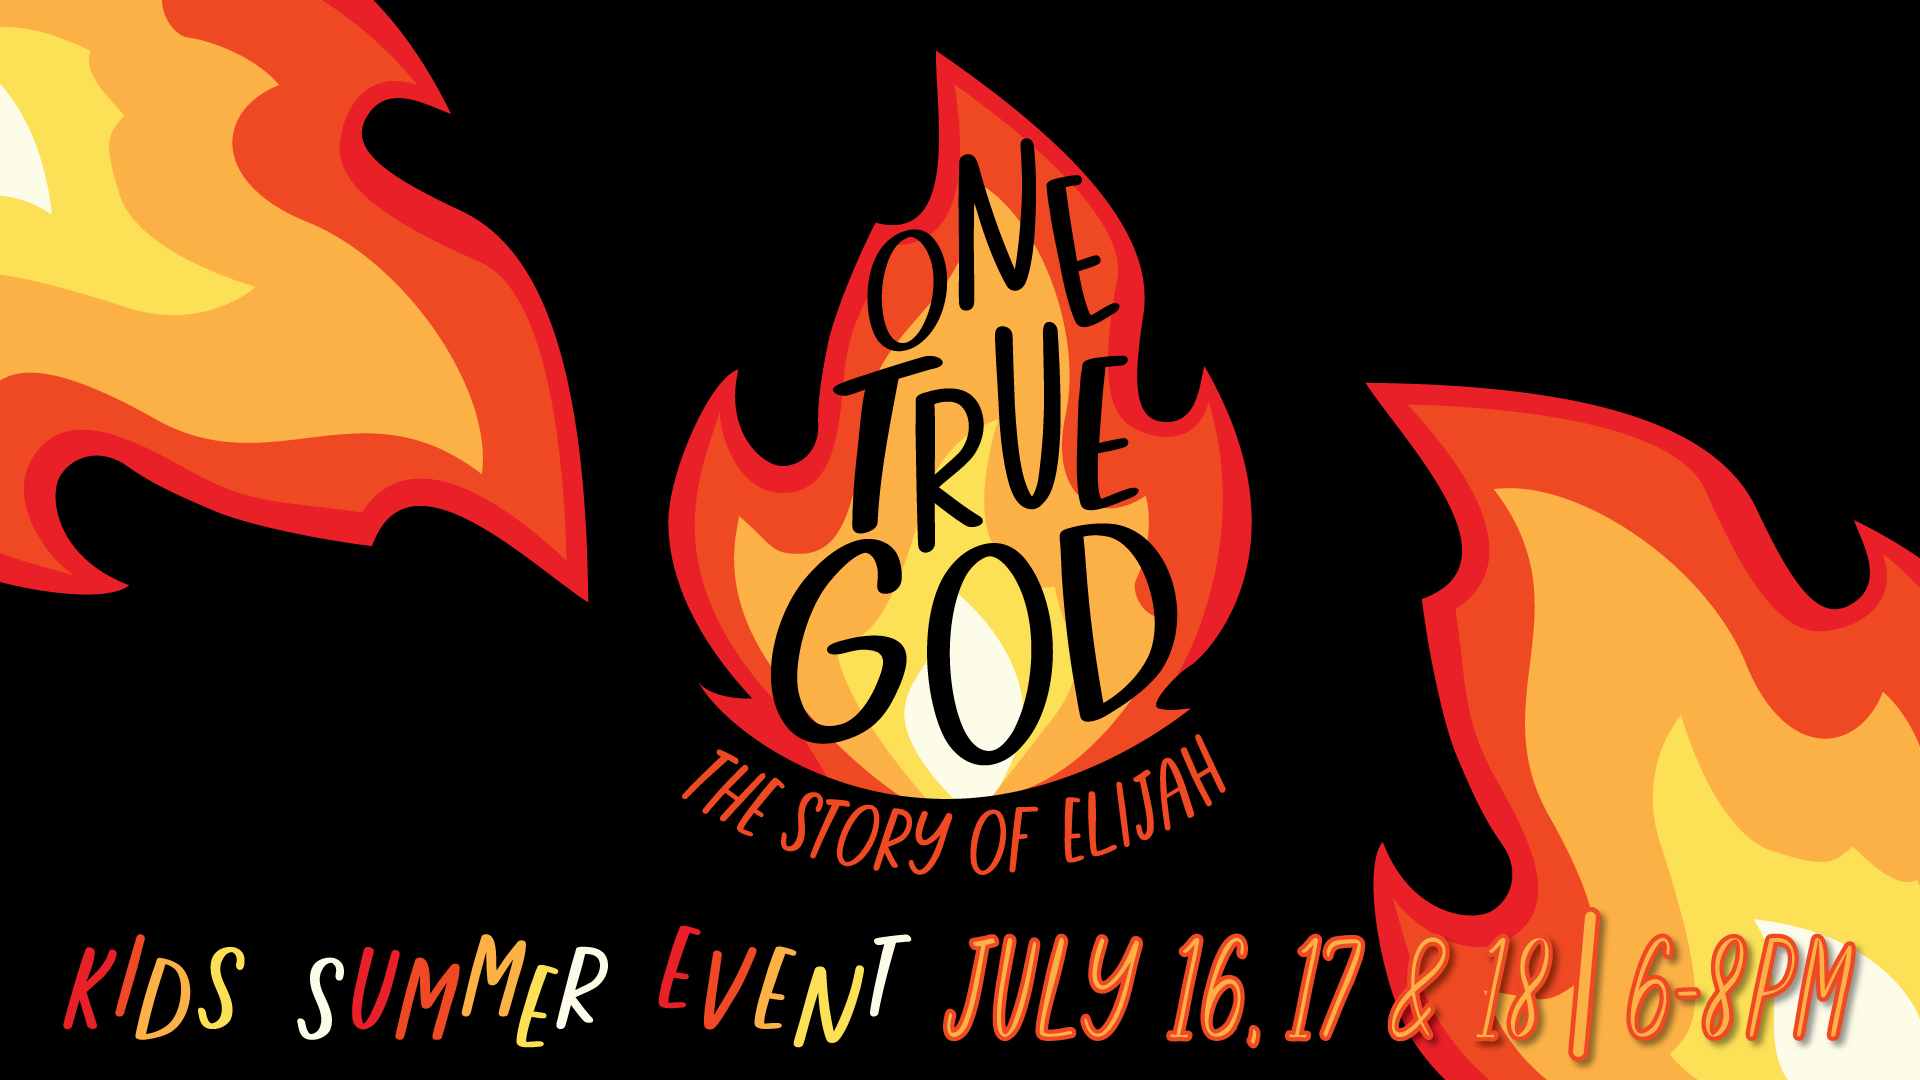 One True God: The Story of Elijah | Manor Church Kids Summer Event 2024 | July 16, 17 and 18 from 6-8pm